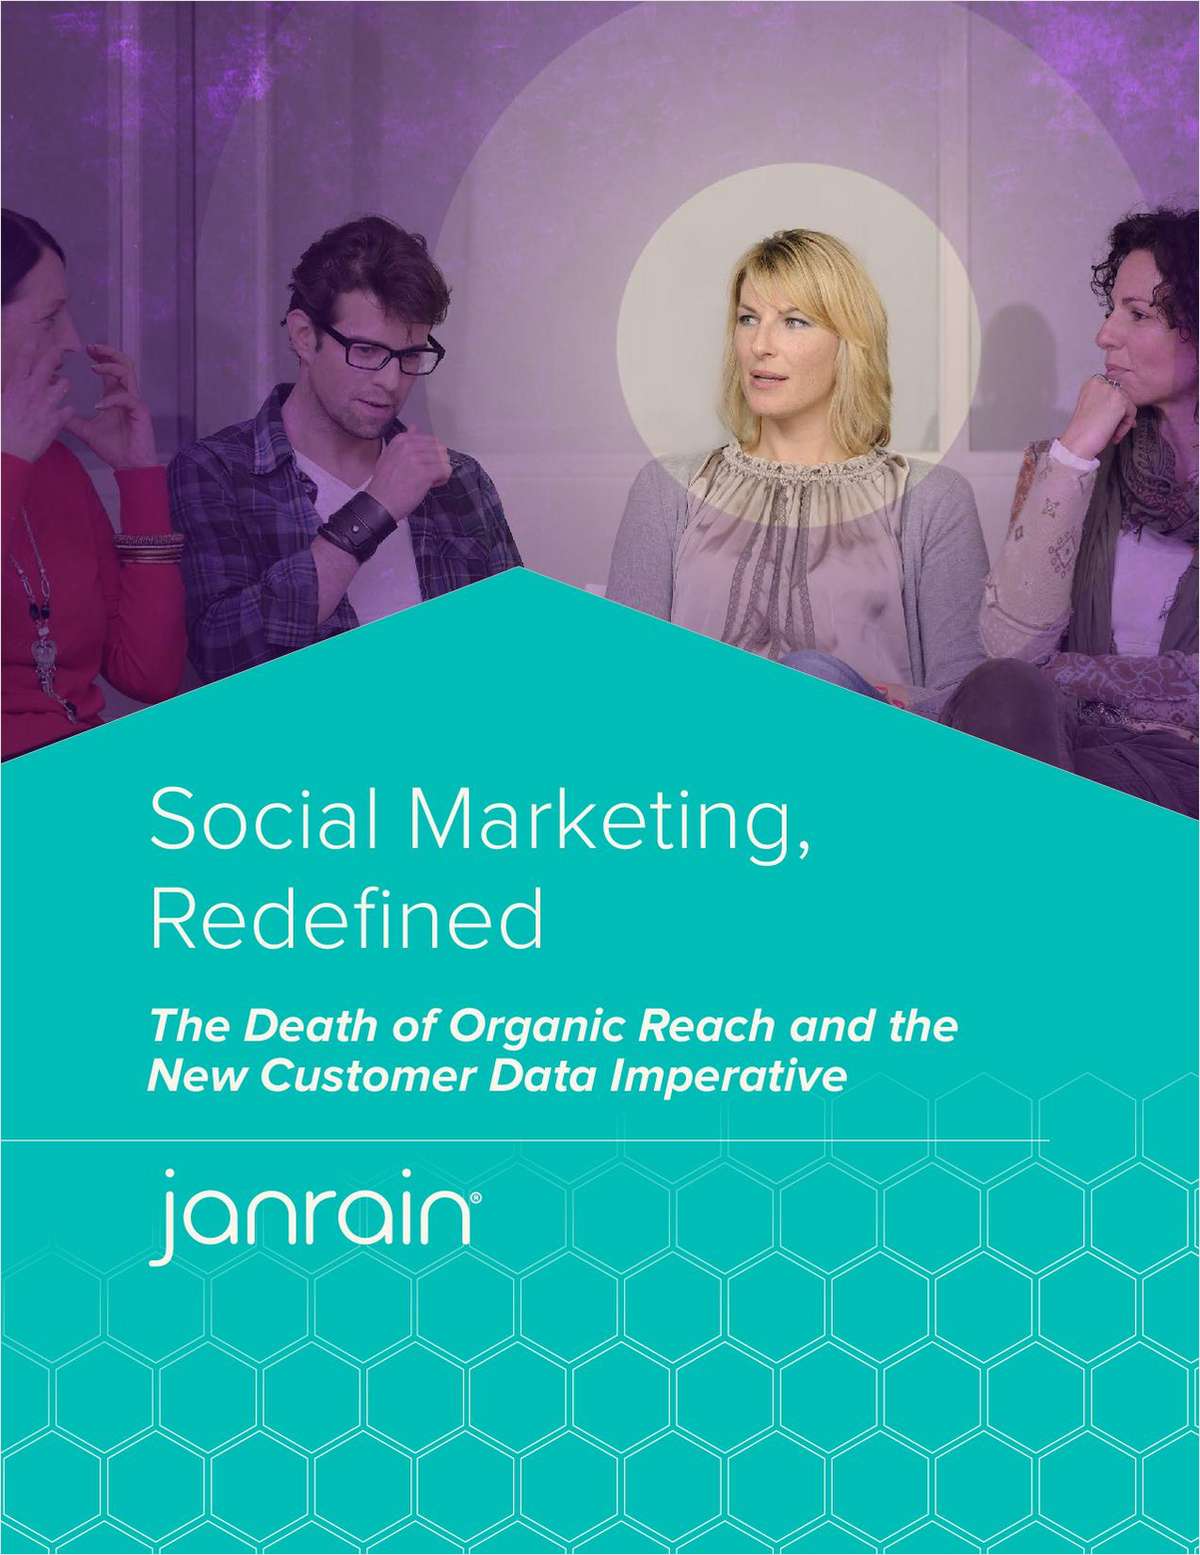 Social Marketing, Redefined: The Death of Organic Reach and the New Customer Data Imperative